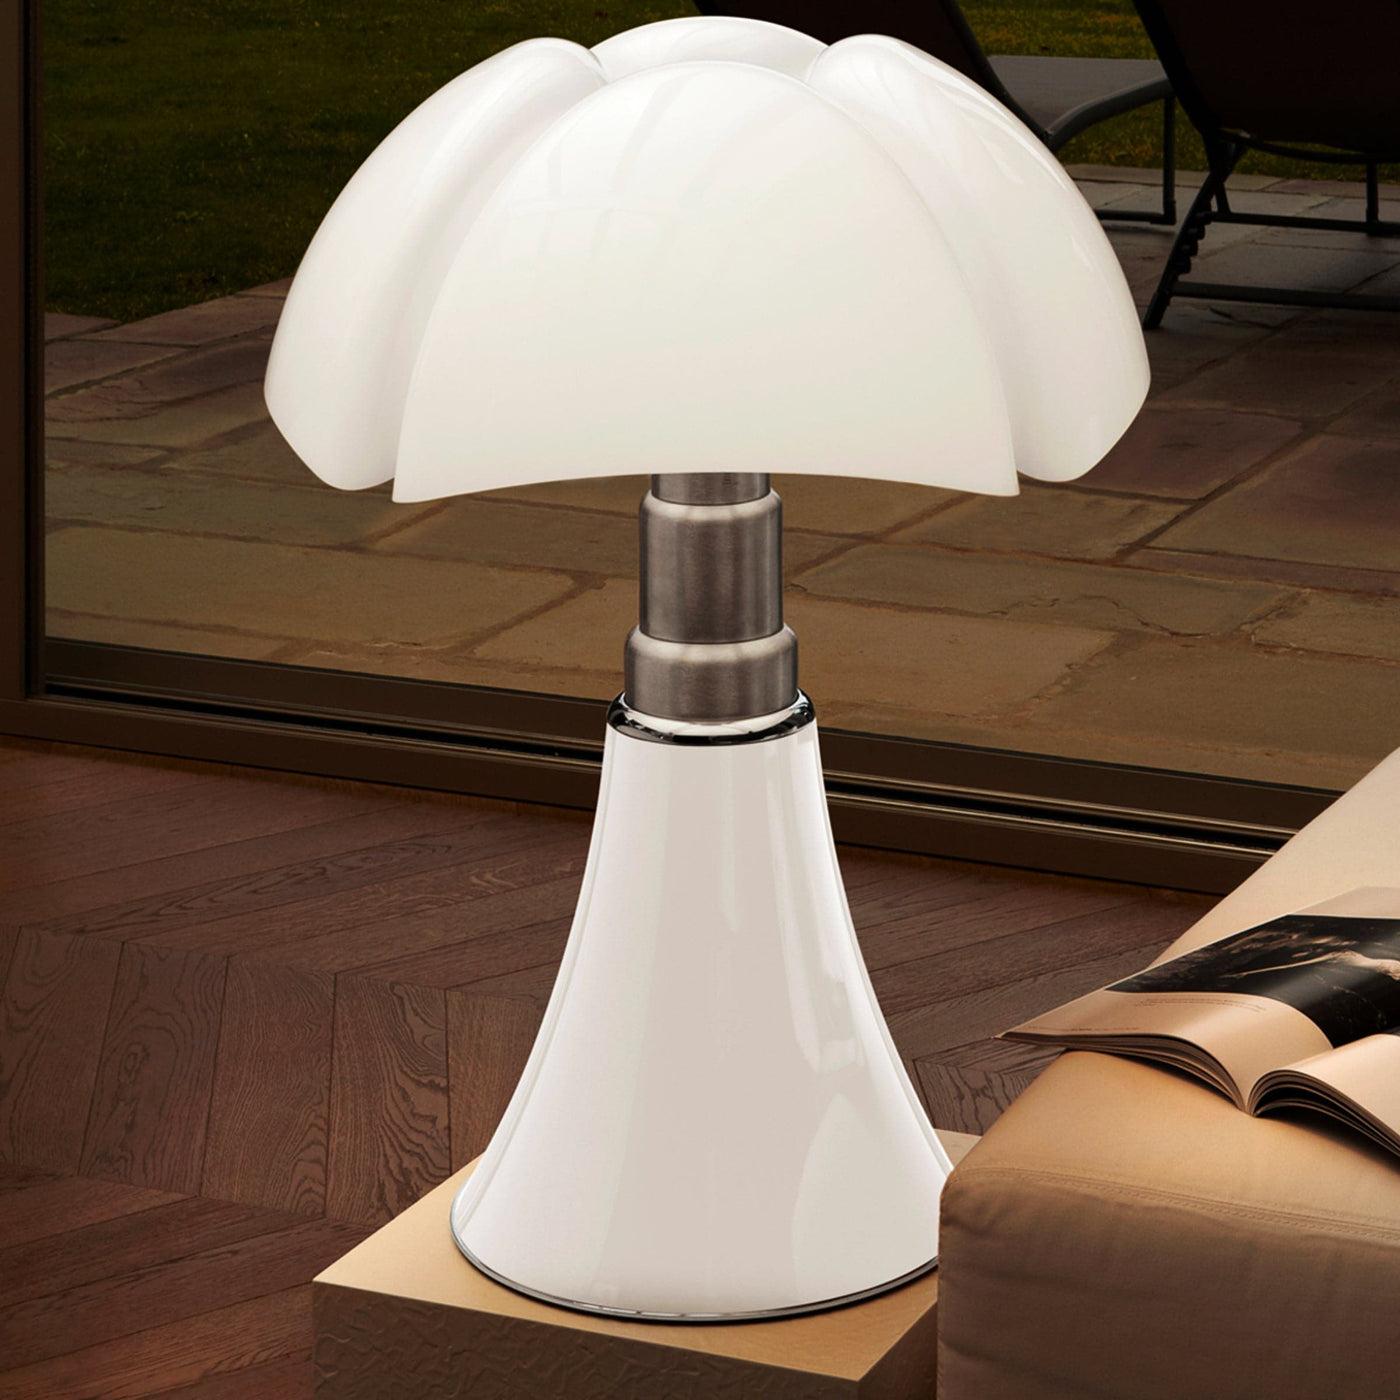 Table and Floor Lamp PIPISTRELLO 66-86 cm by Gae Aulenti 016